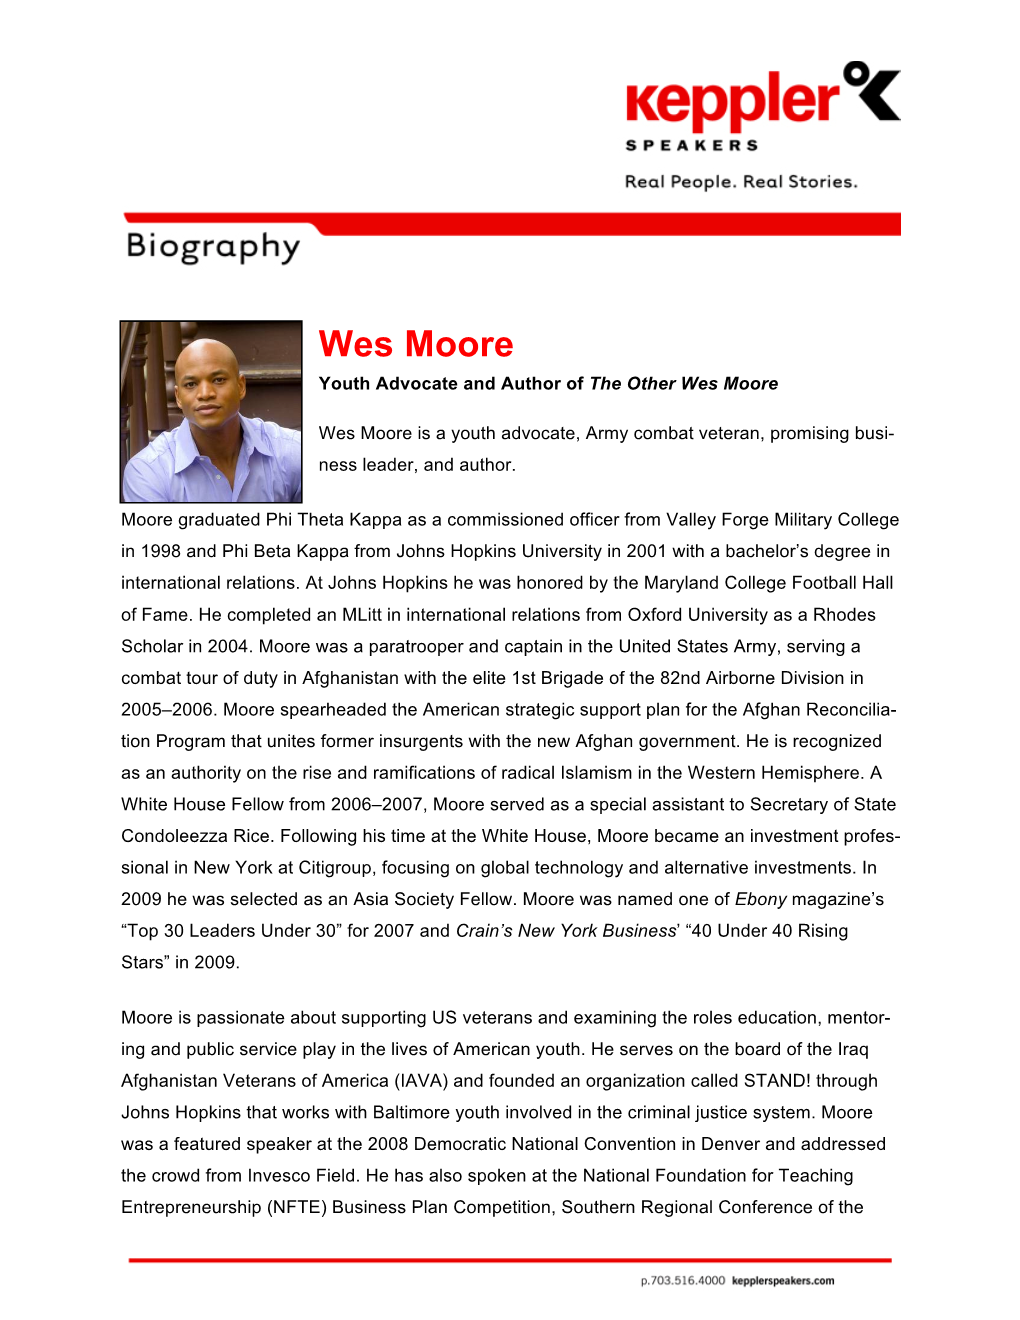 Wes Moore Youth Advocate and Author of the Other Wes Moore